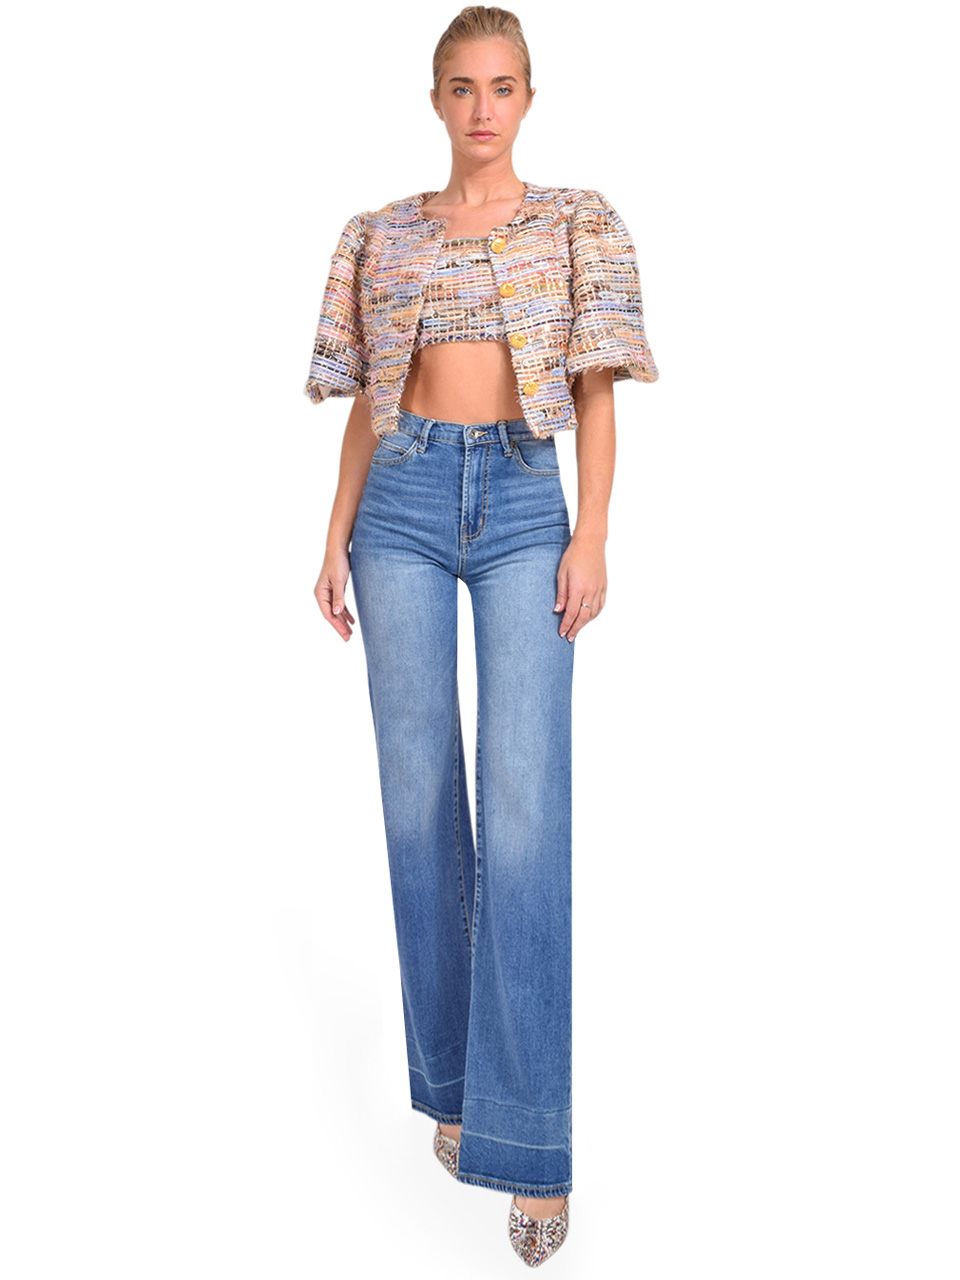 SERRA After Midnight High Rise Wide Leg Jean Full Outfit 